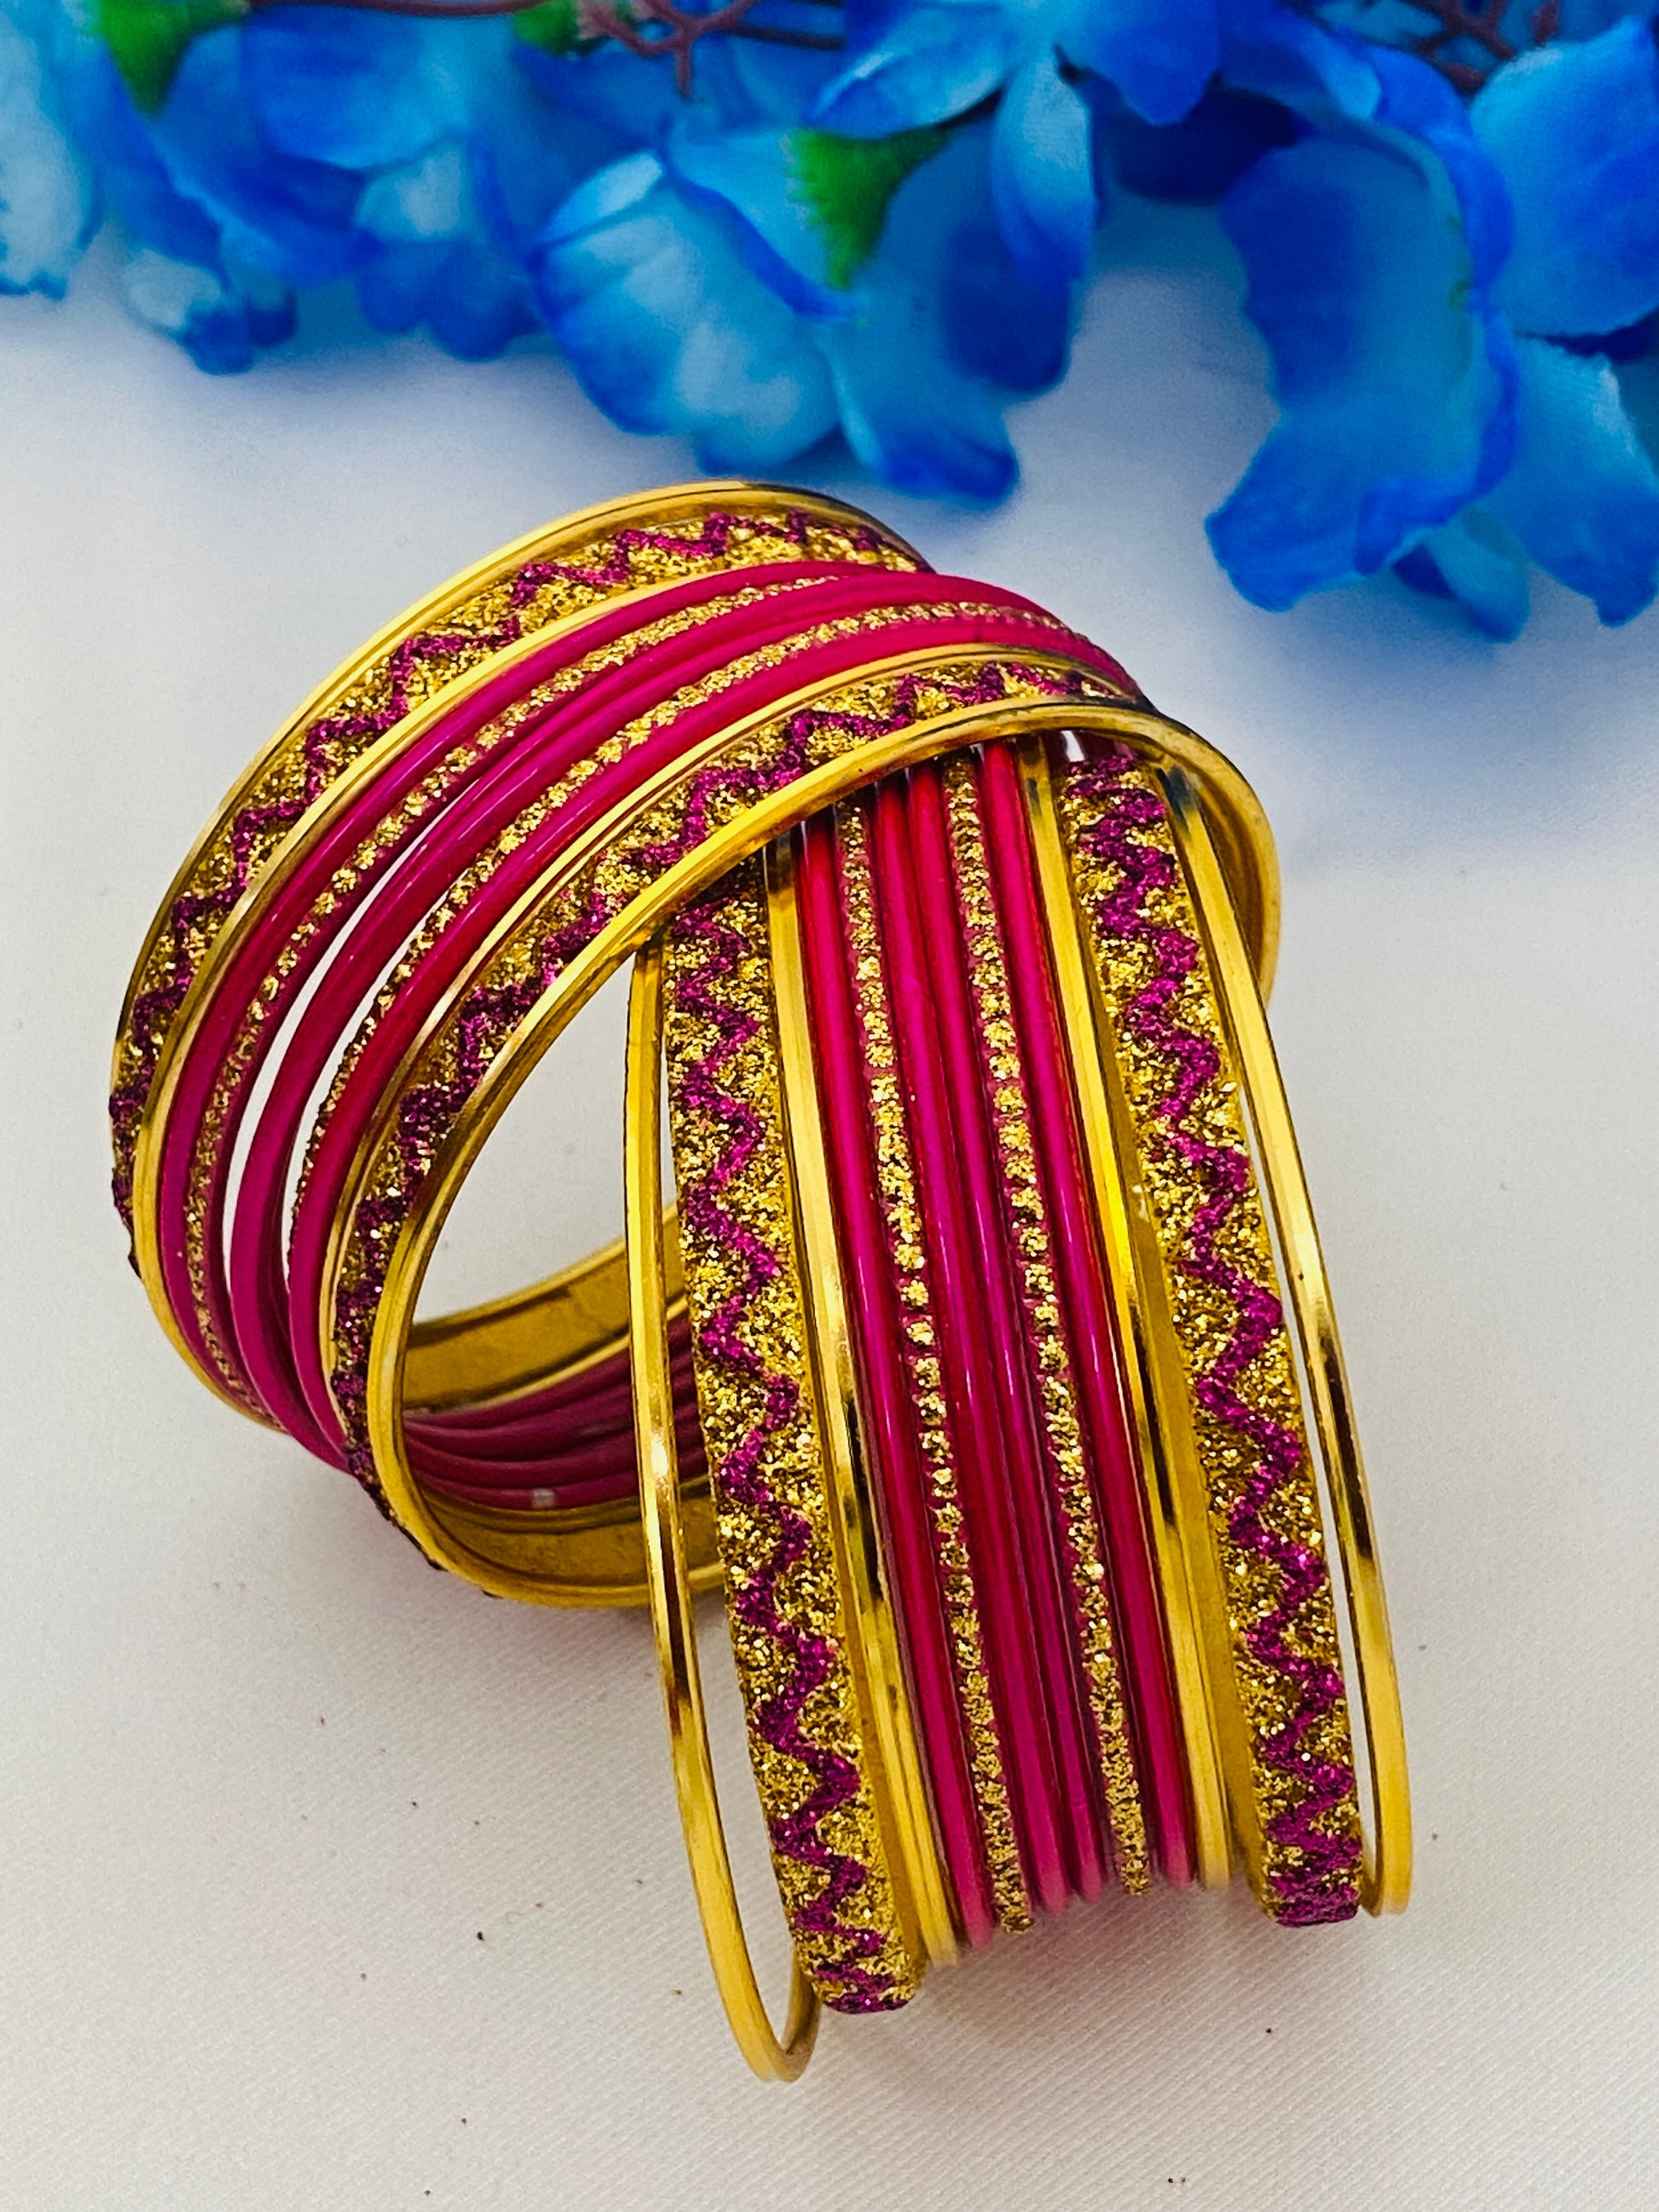  Metal Bangles With Golden Glitters In Holbrook